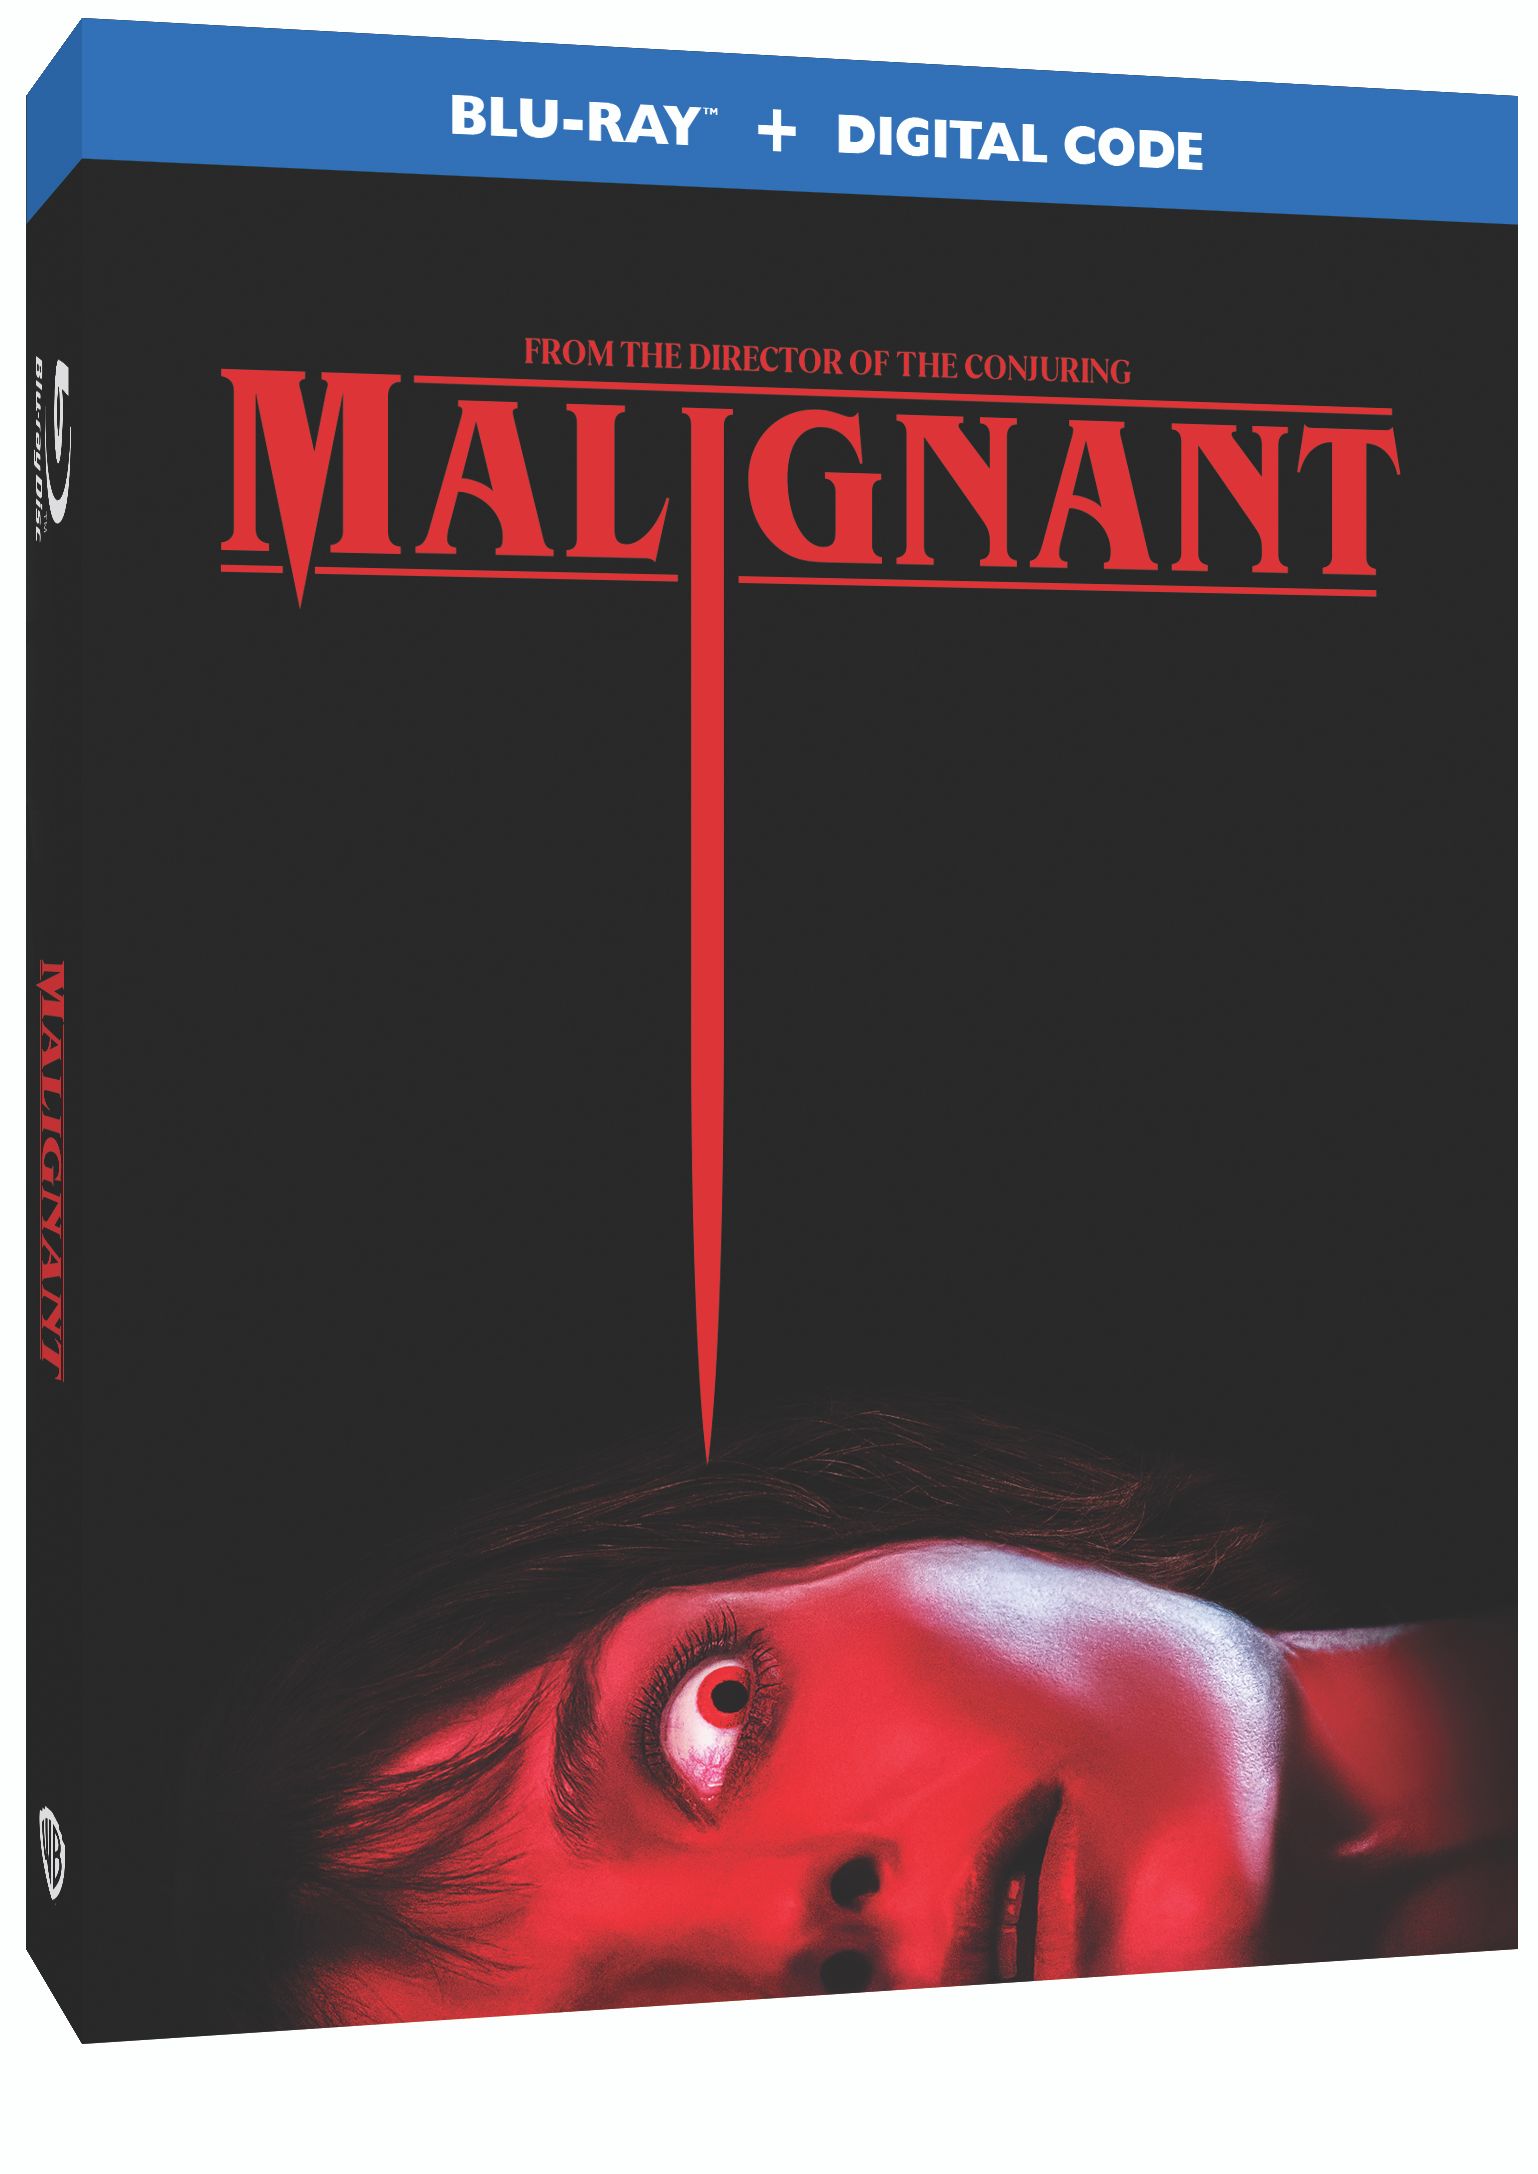 James Wan’s Latest Horror Movie Malignant Gets Blu-ray Release